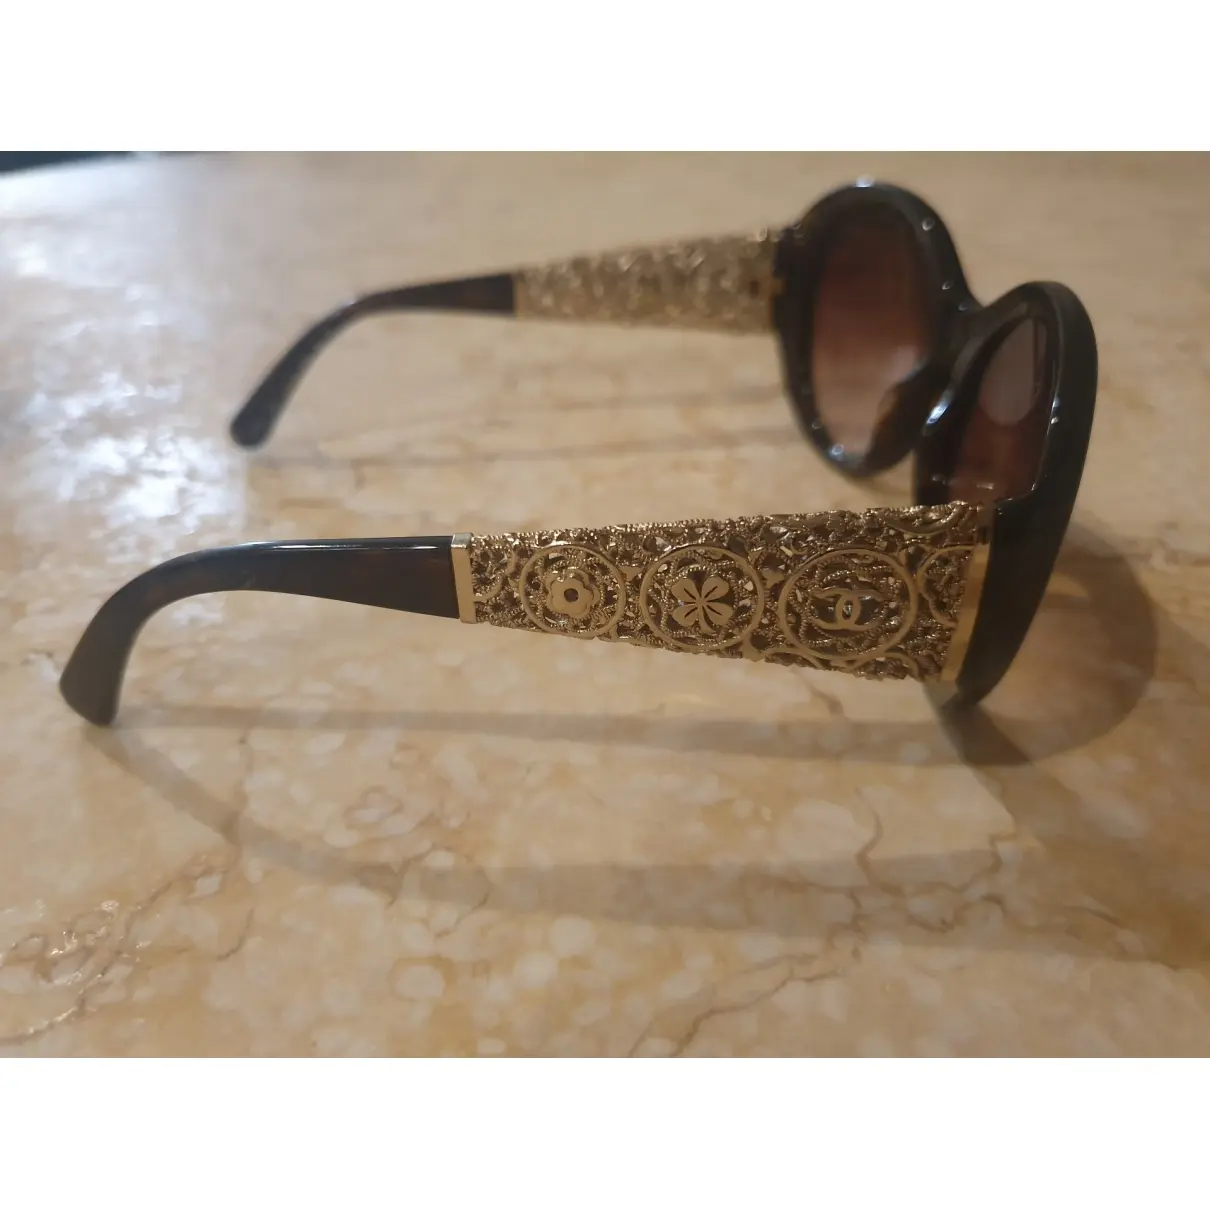 Chanel Oversized sunglasses for sale